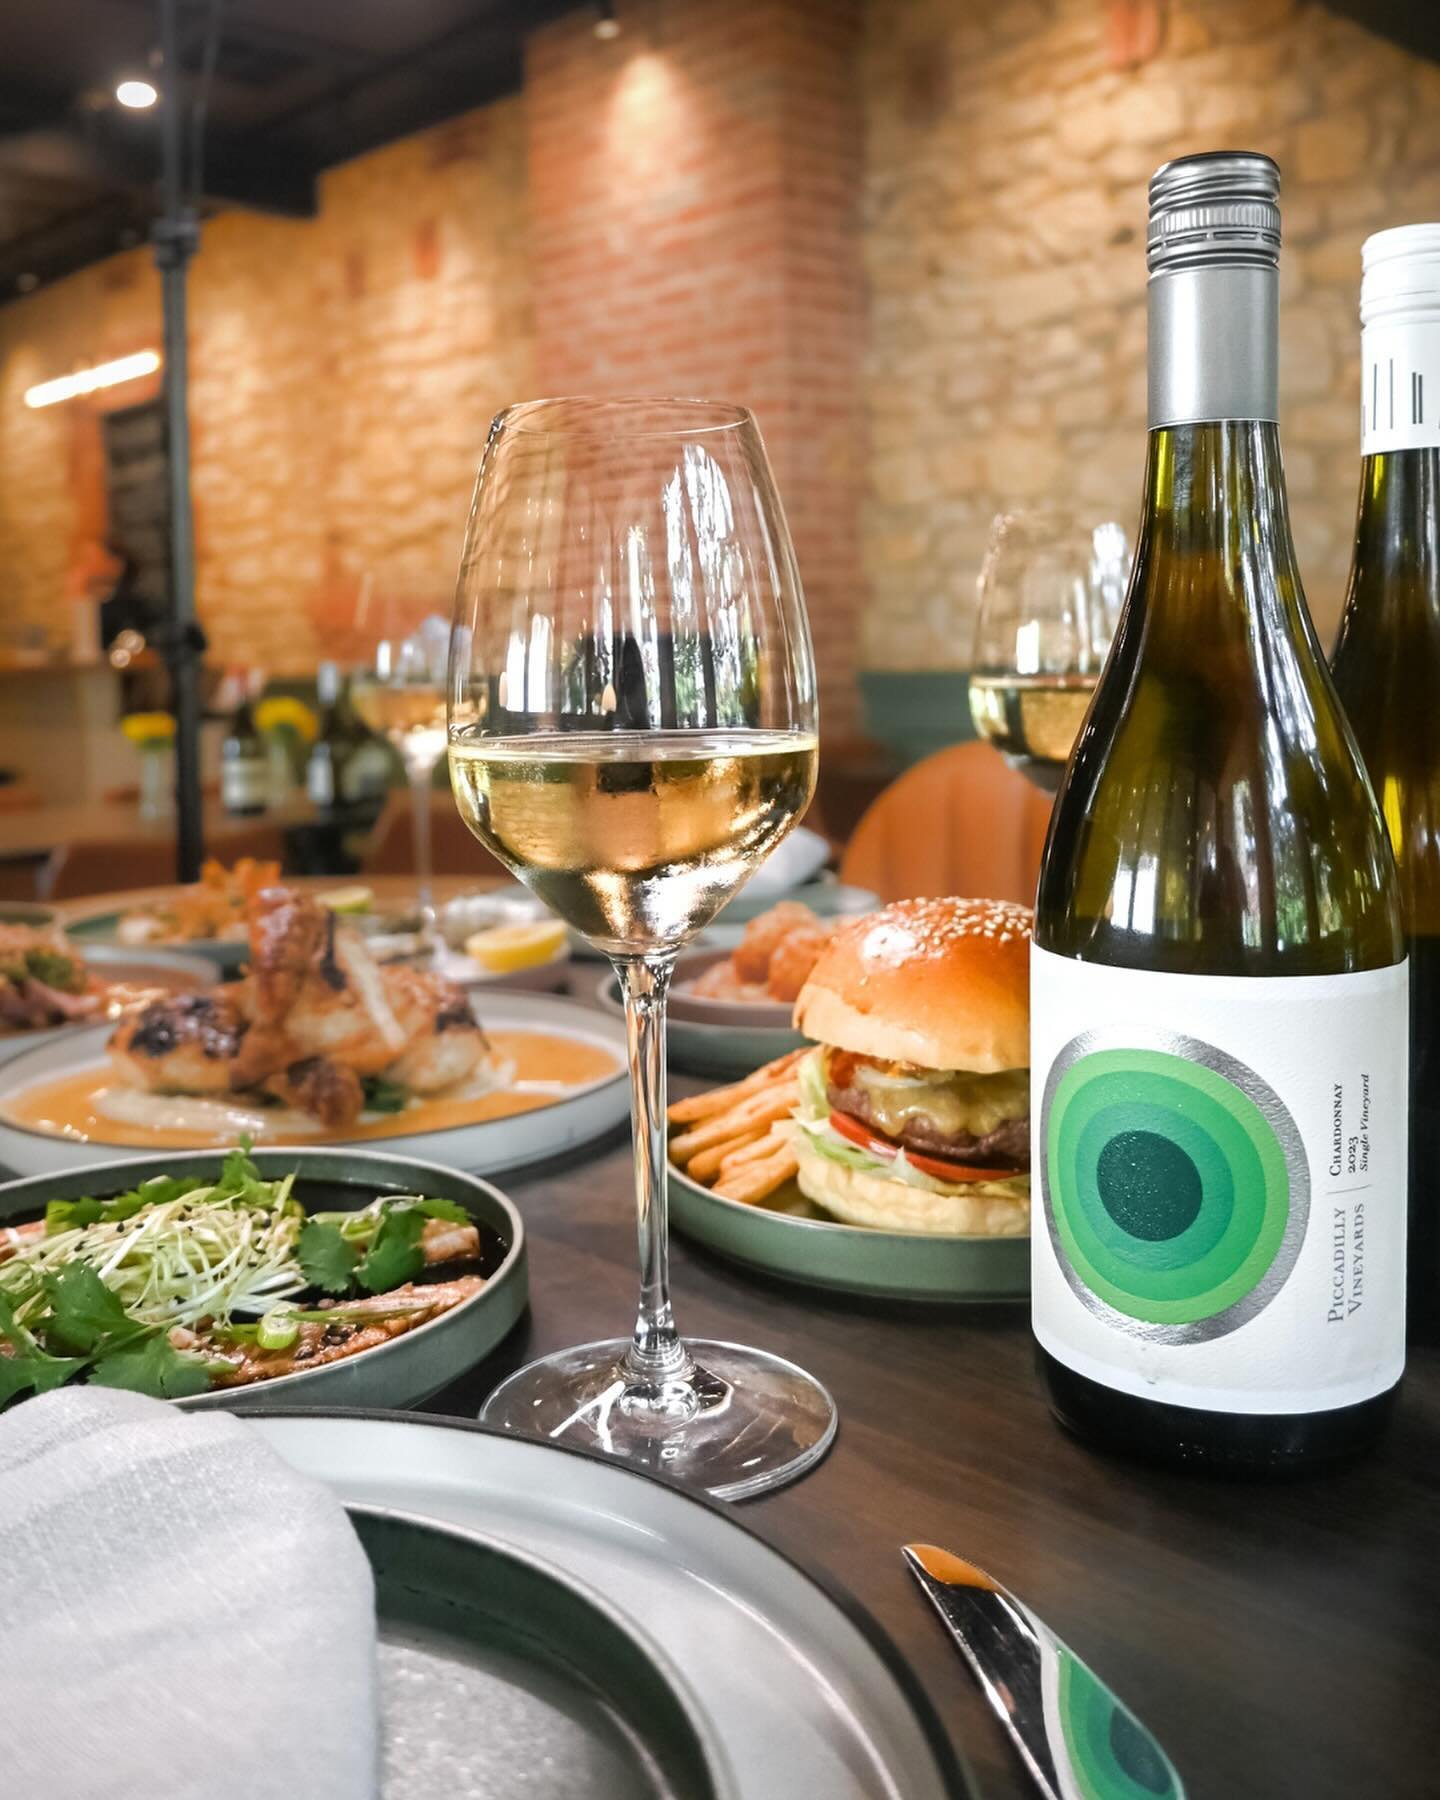 Looking for weekend plans? Escape to the Adelaide Hills and visit Stirling&rsquo;s neighbourhood wine bar @barrelstirling 

Chef Jamie Laing is in the kitchen serving up a new modern Australian menu every Thursday, Friday and Saturday night!